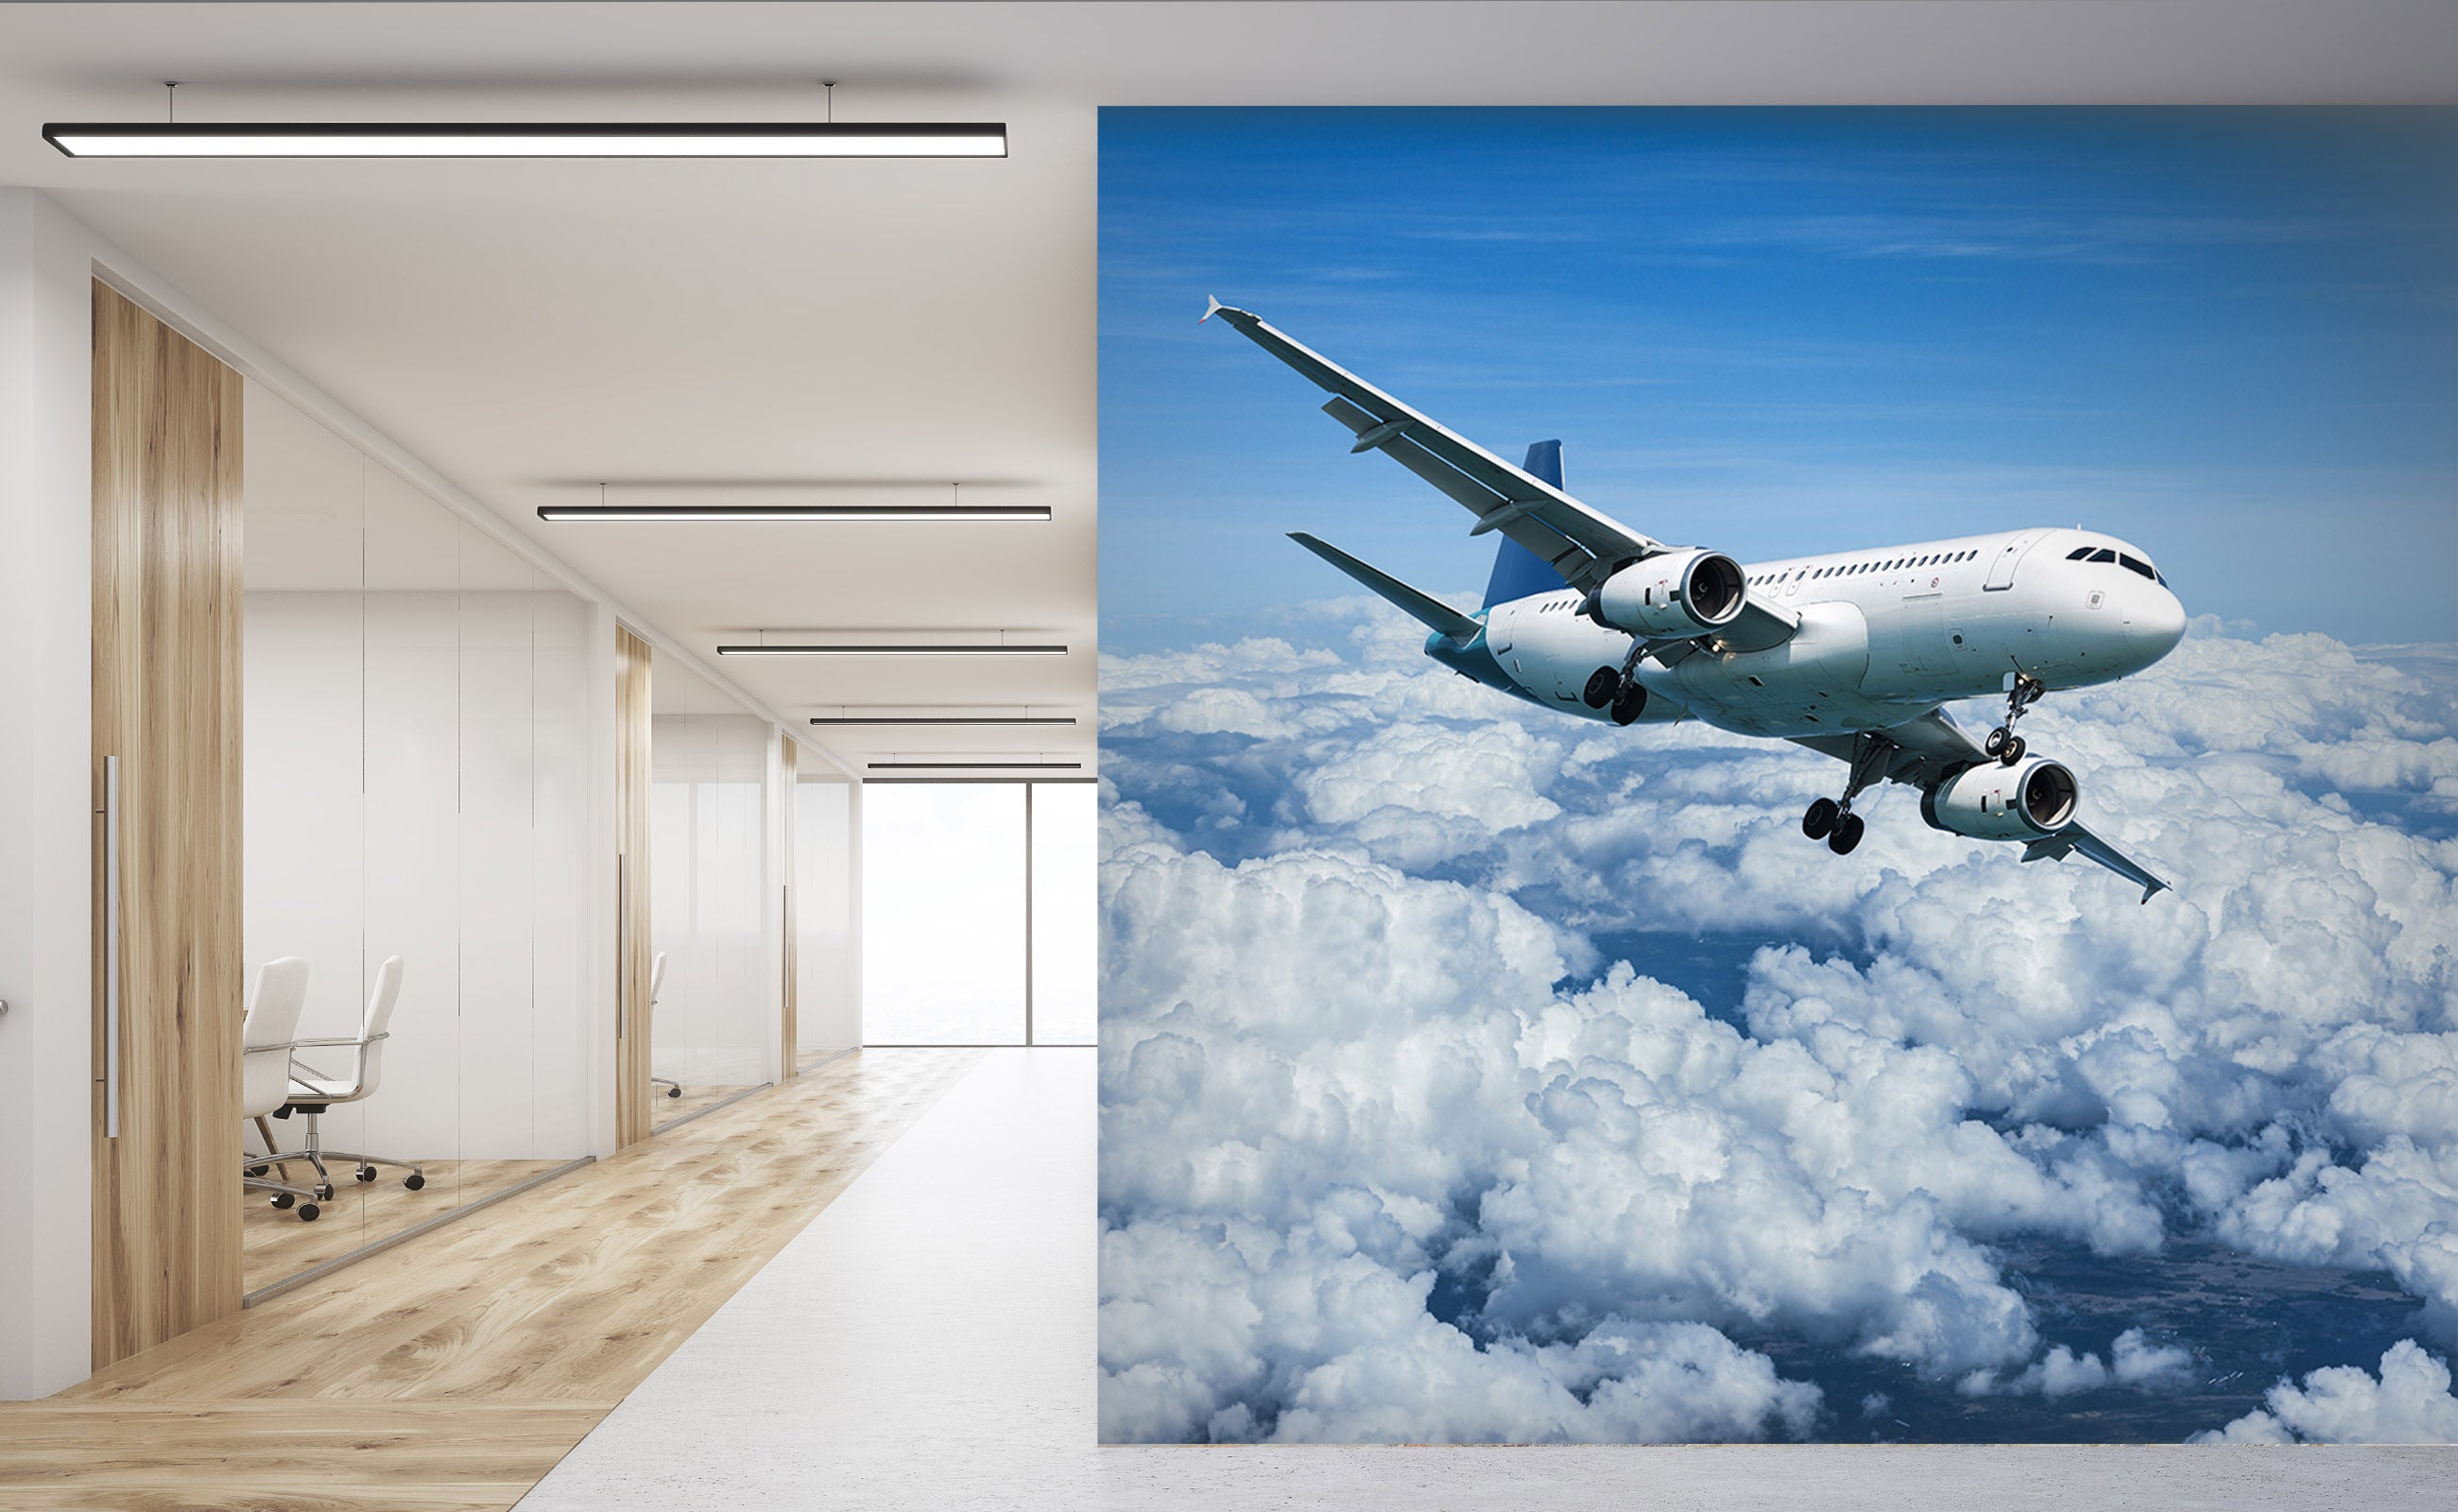 3D White Clouds Plane 267 Vehicle Wall Murals